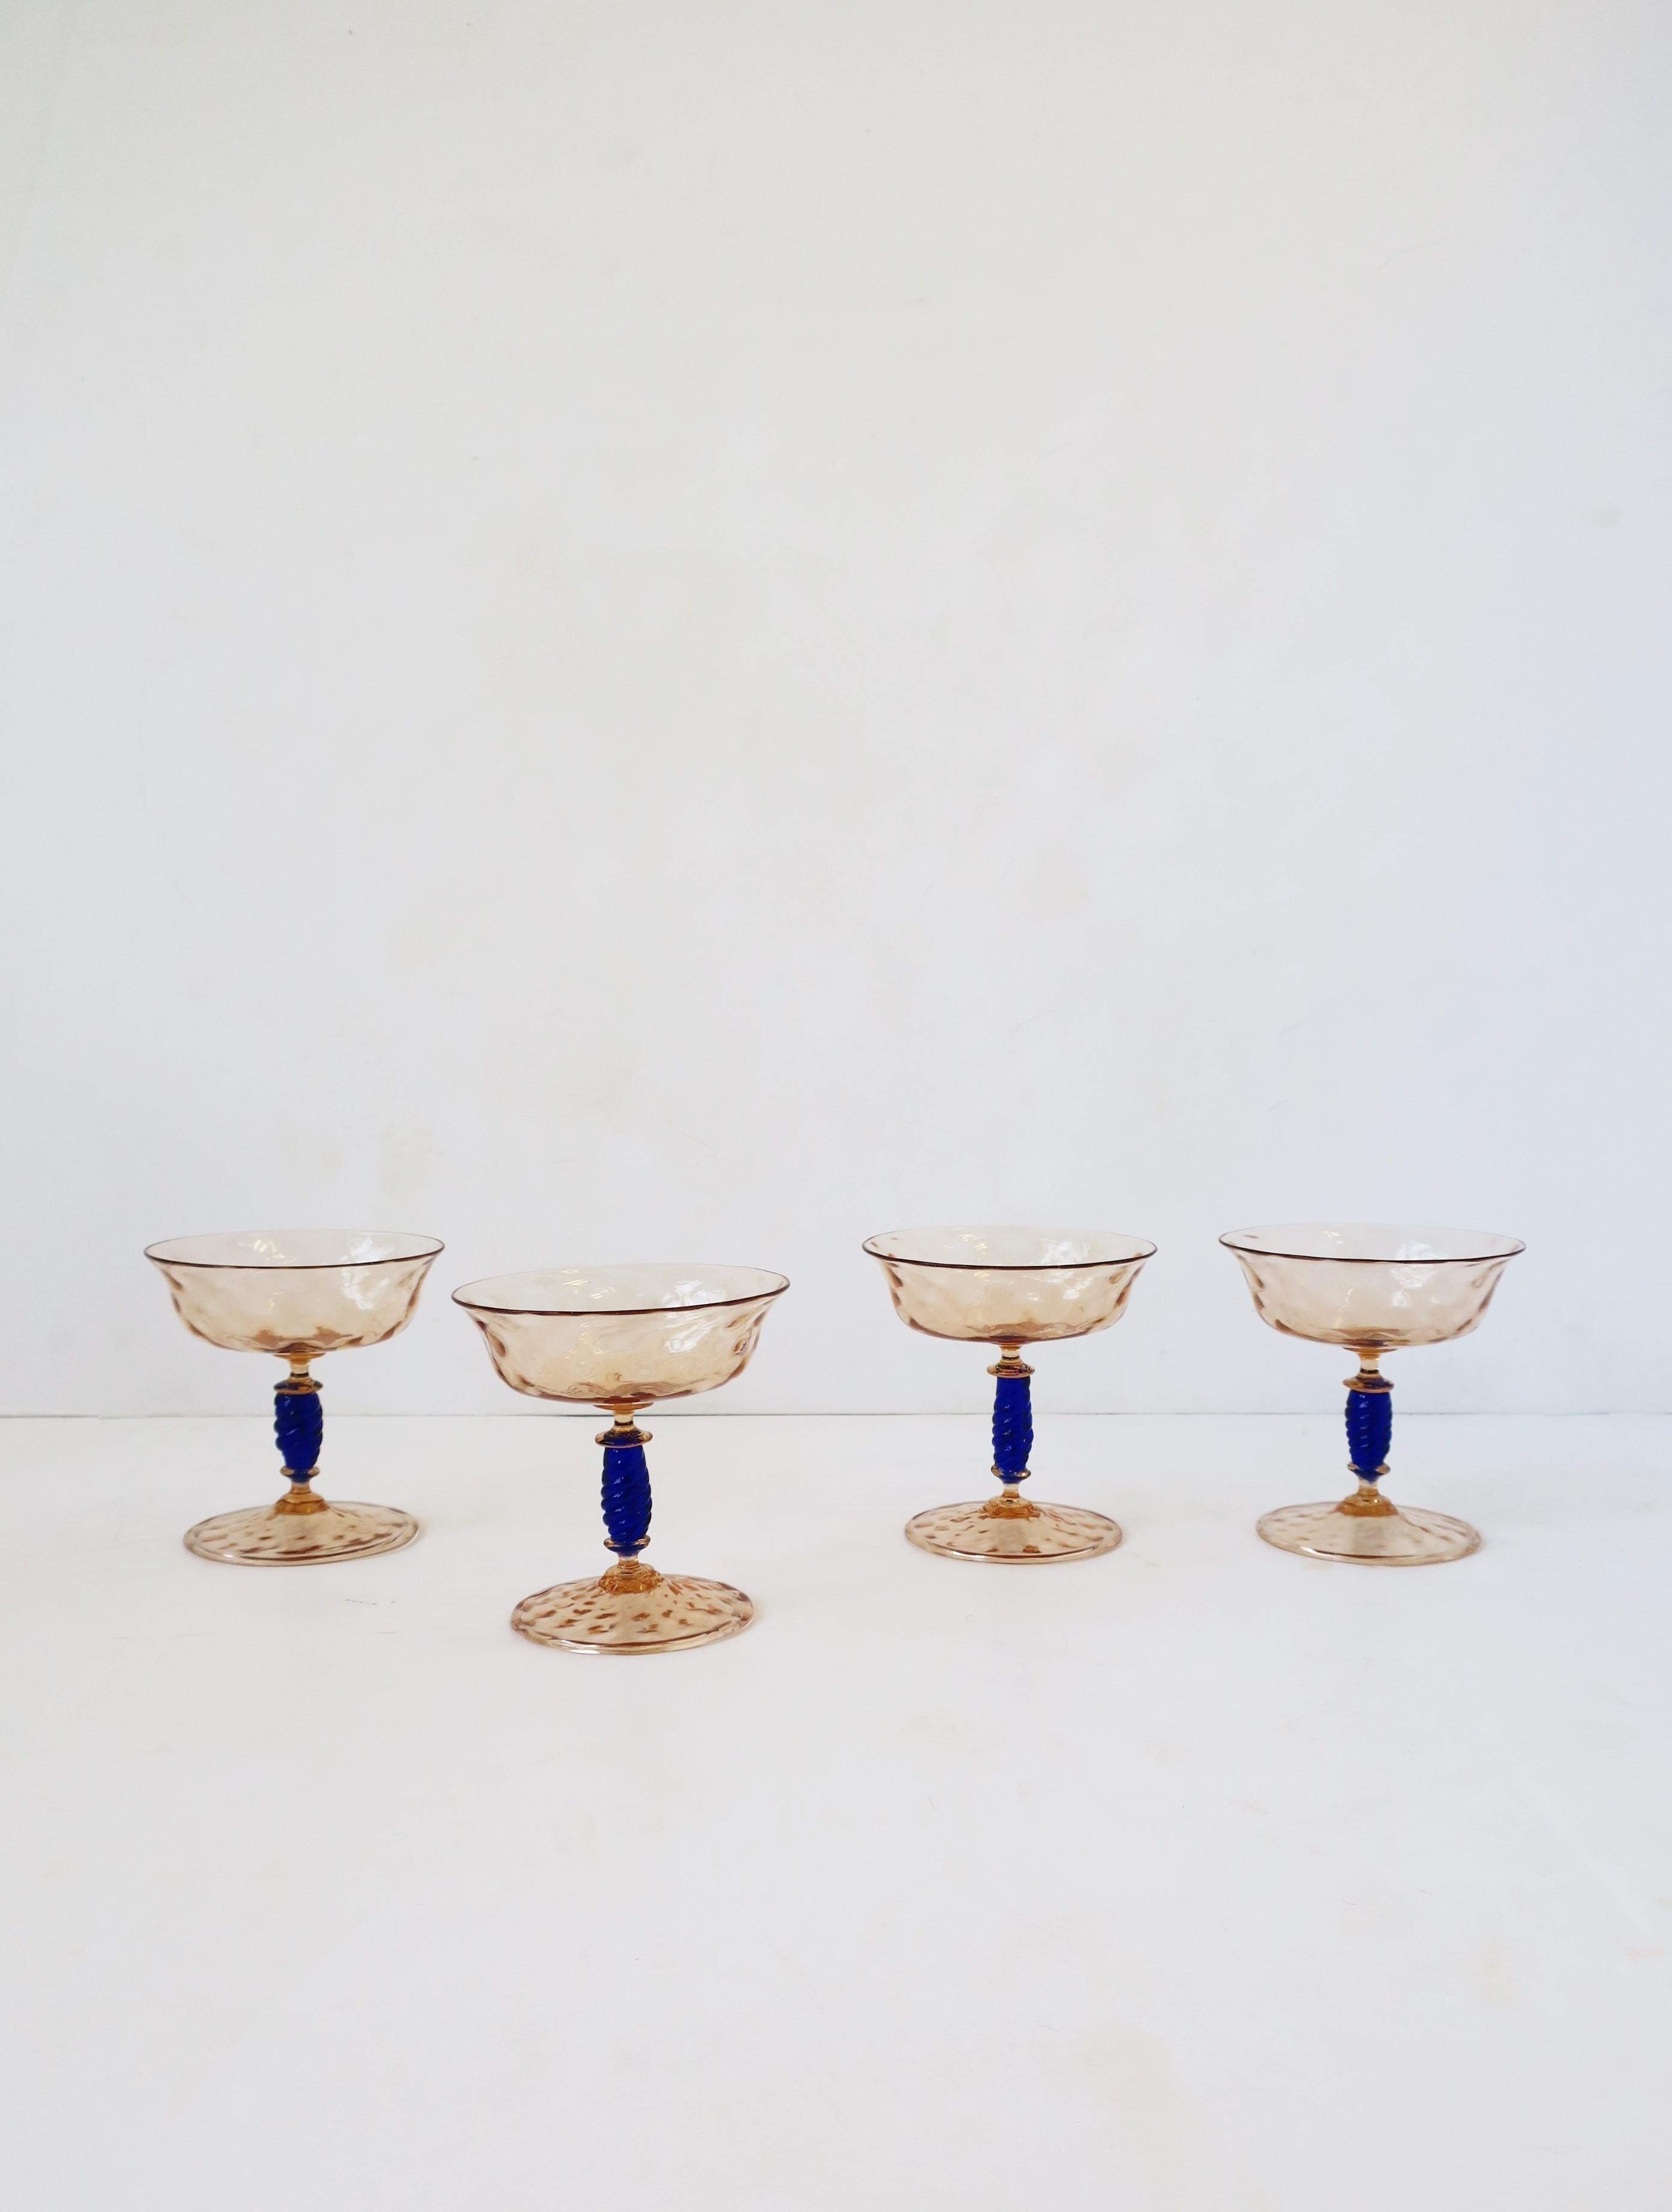 A beautiful set of four (4) Italian Venetian Murano art glass Champagne coups glasses. Glasses are a beautiful combination of rose-gold and sapphire blue hue Murano art glass. Great for Champagne or a cocktail; For summer or holiday entertaining,